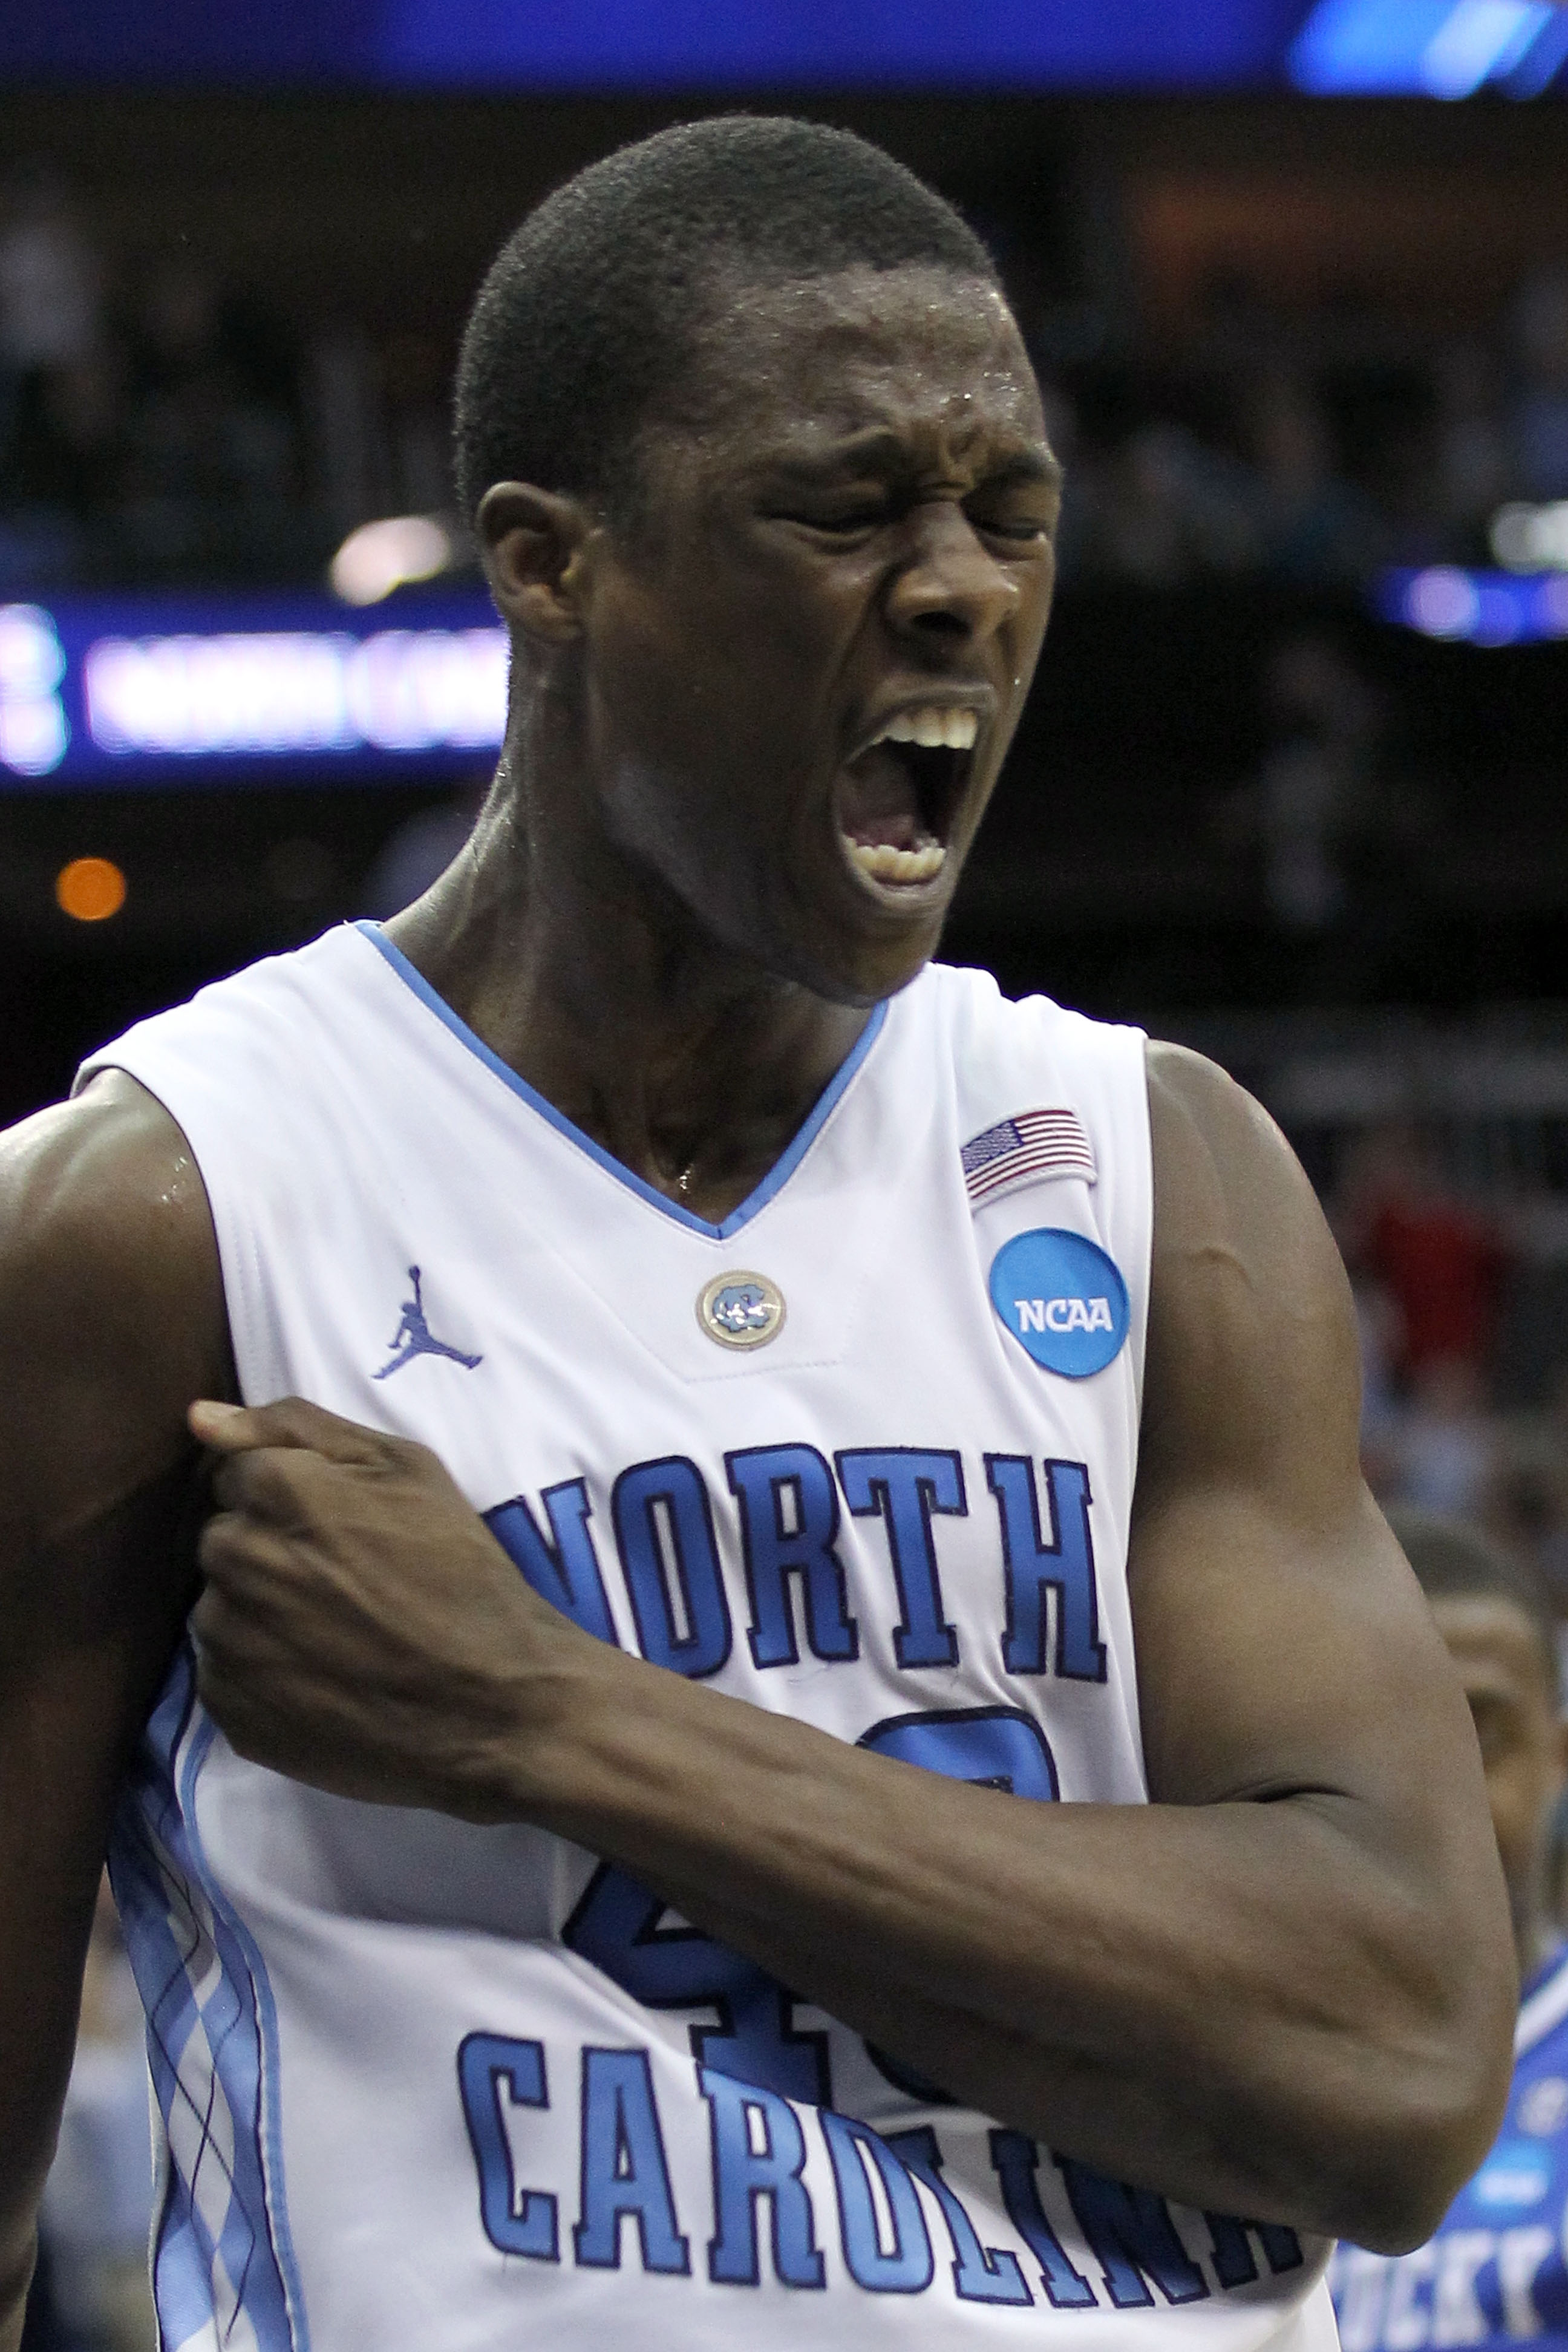 NEWARK, NJ - MARCH 27:  Harrison Barnes #40 of the North Carolina Tar Heels reacts after a play during the second half of the game against the Kentucky Wildcats in the east regional final of the 2011 NCAA men's basketball tournament at Prudential Center o